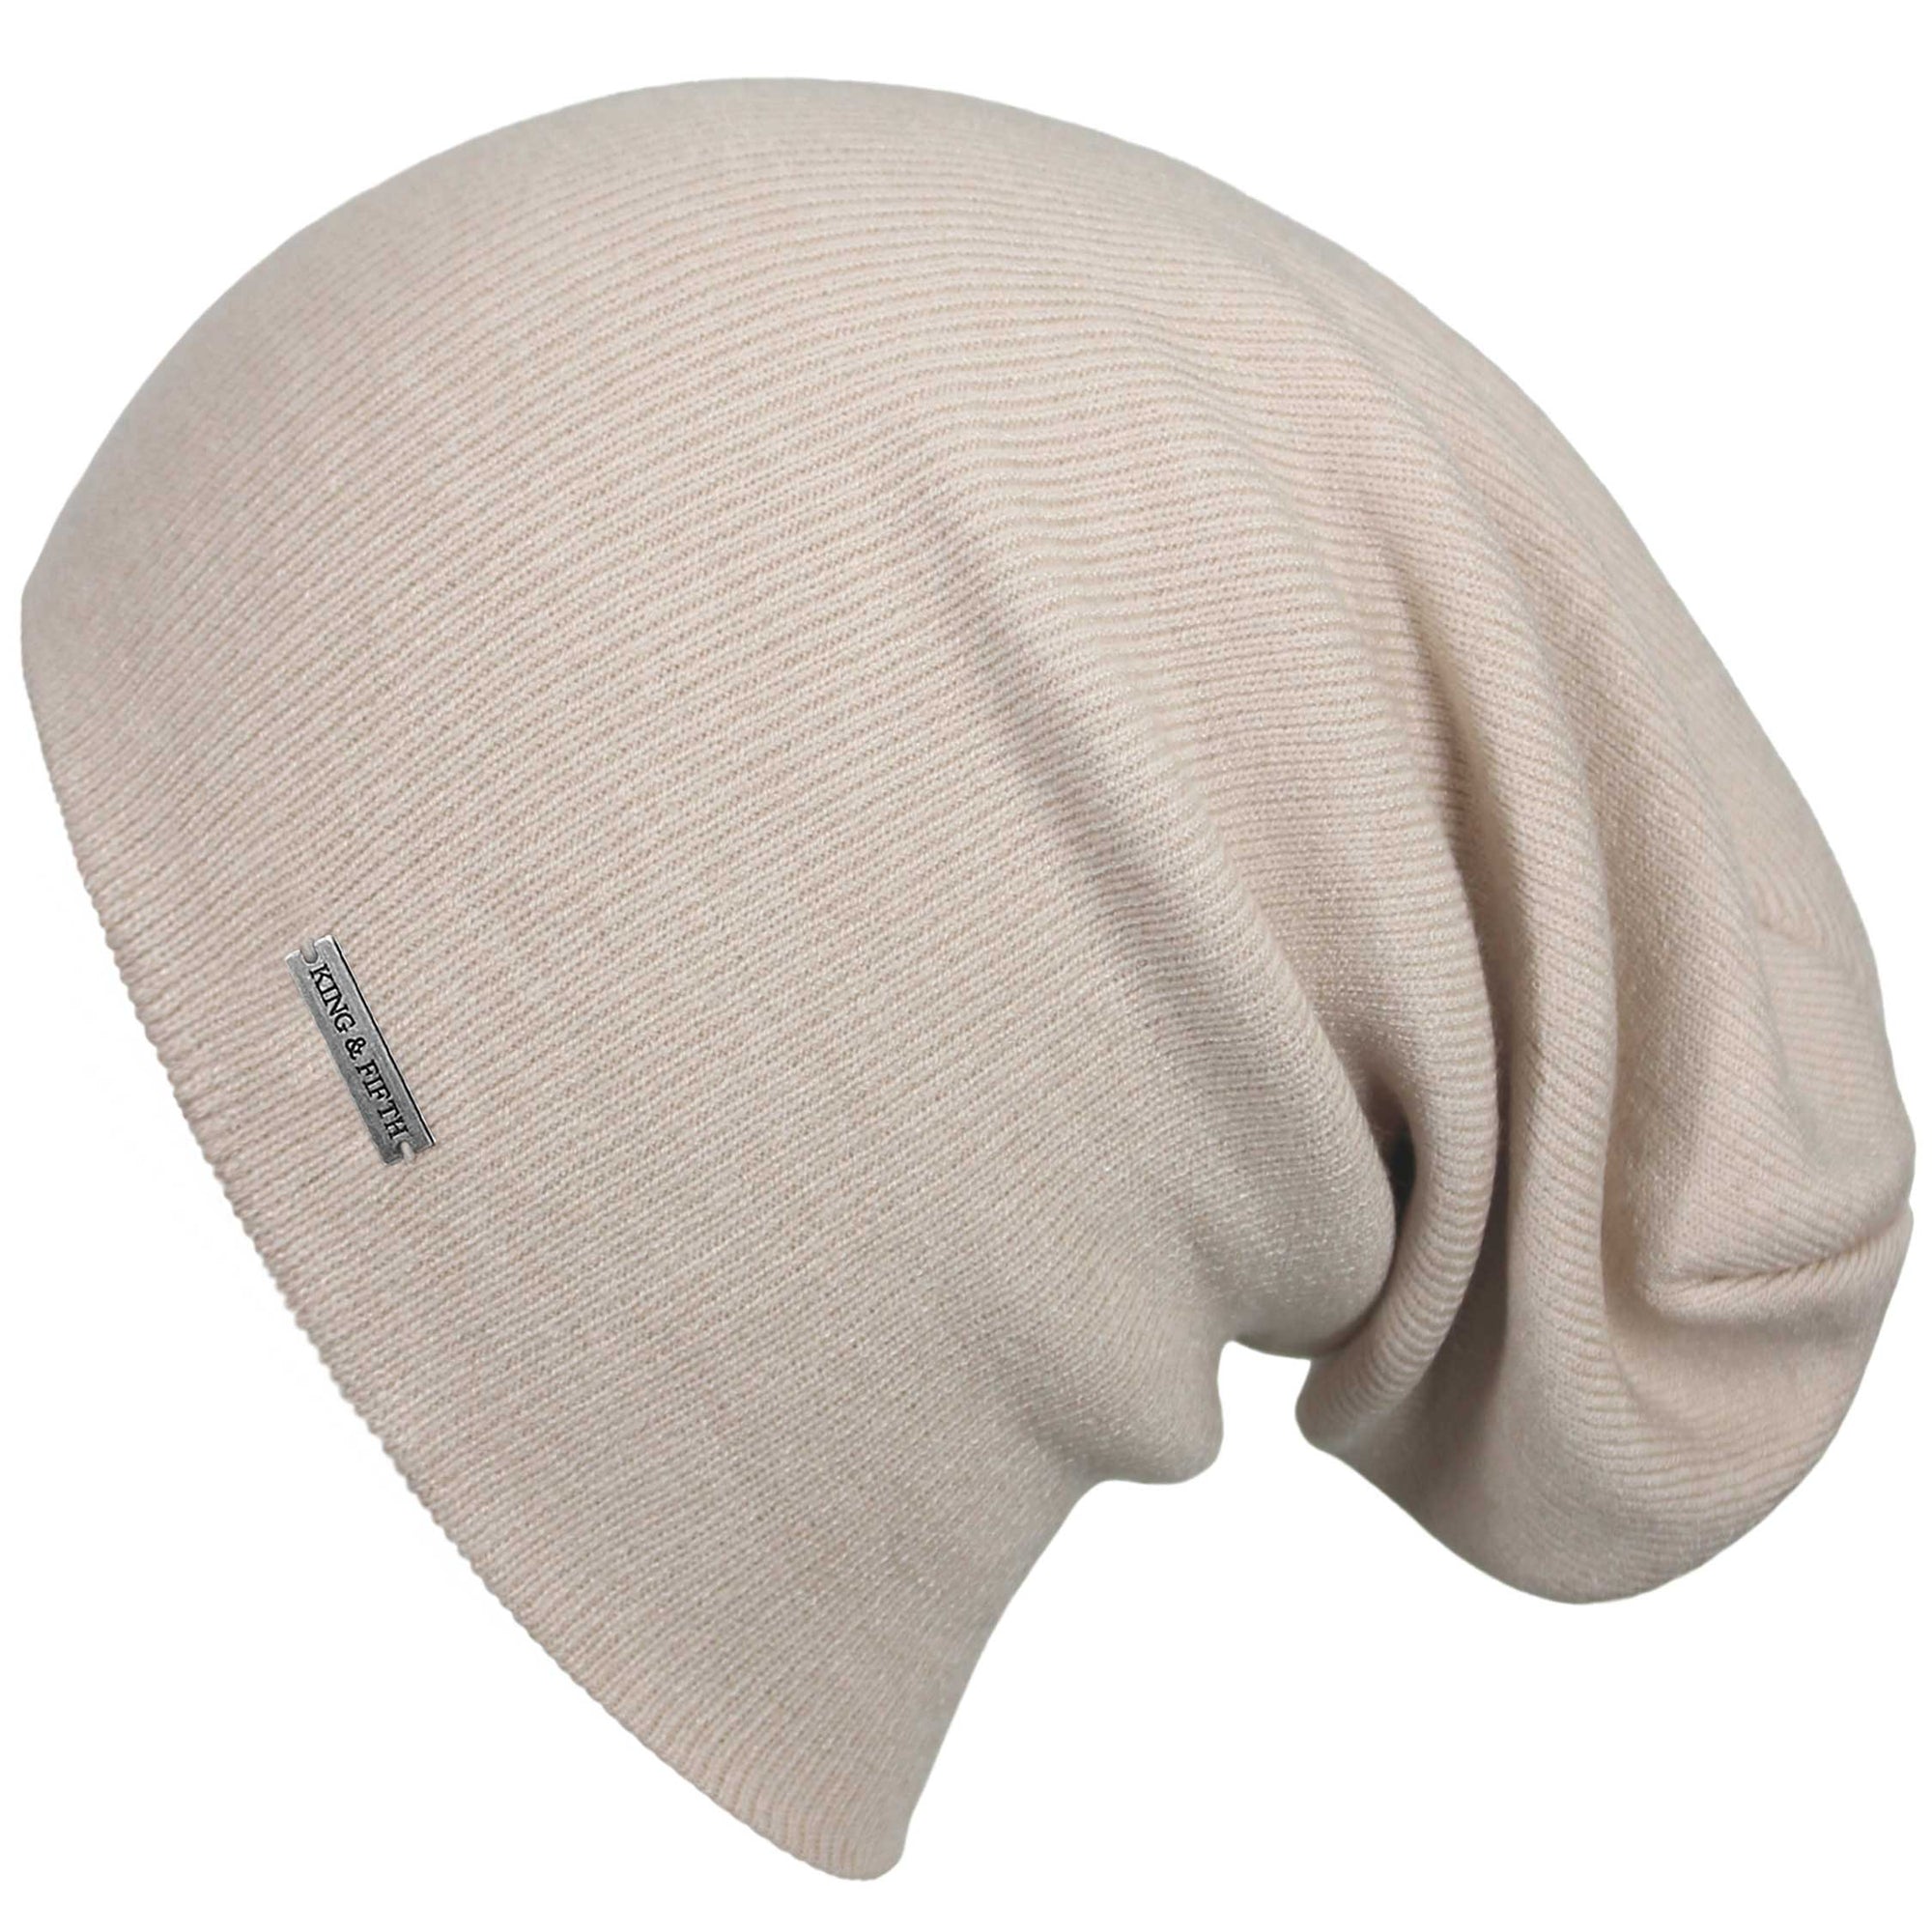 Extra Large Slouchy Beanie for Men